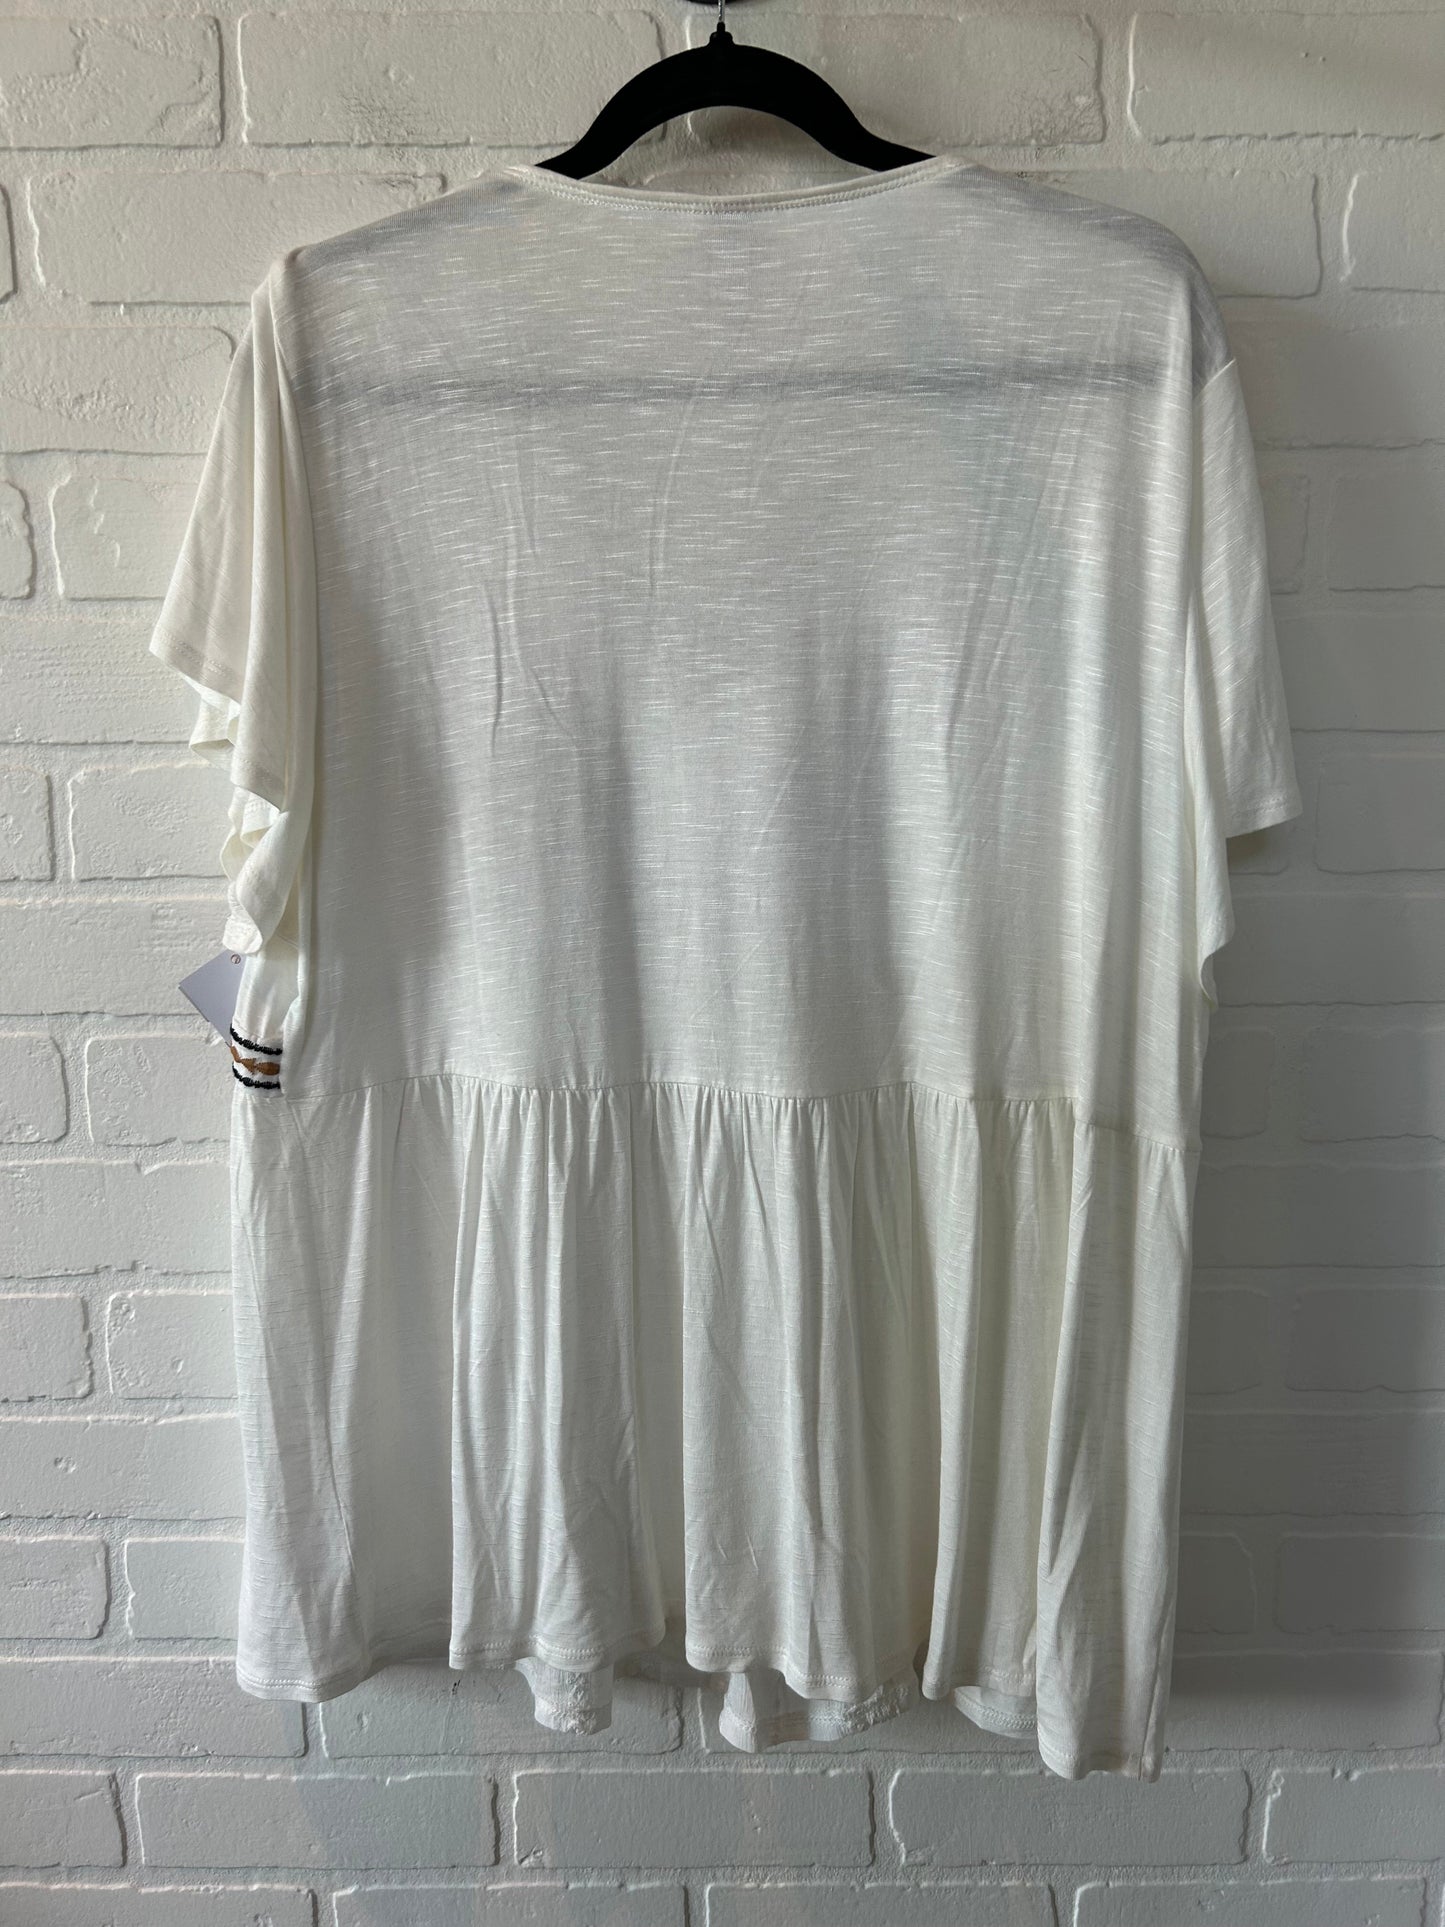 White Top Short Sleeve Knox Rose, Size 1x